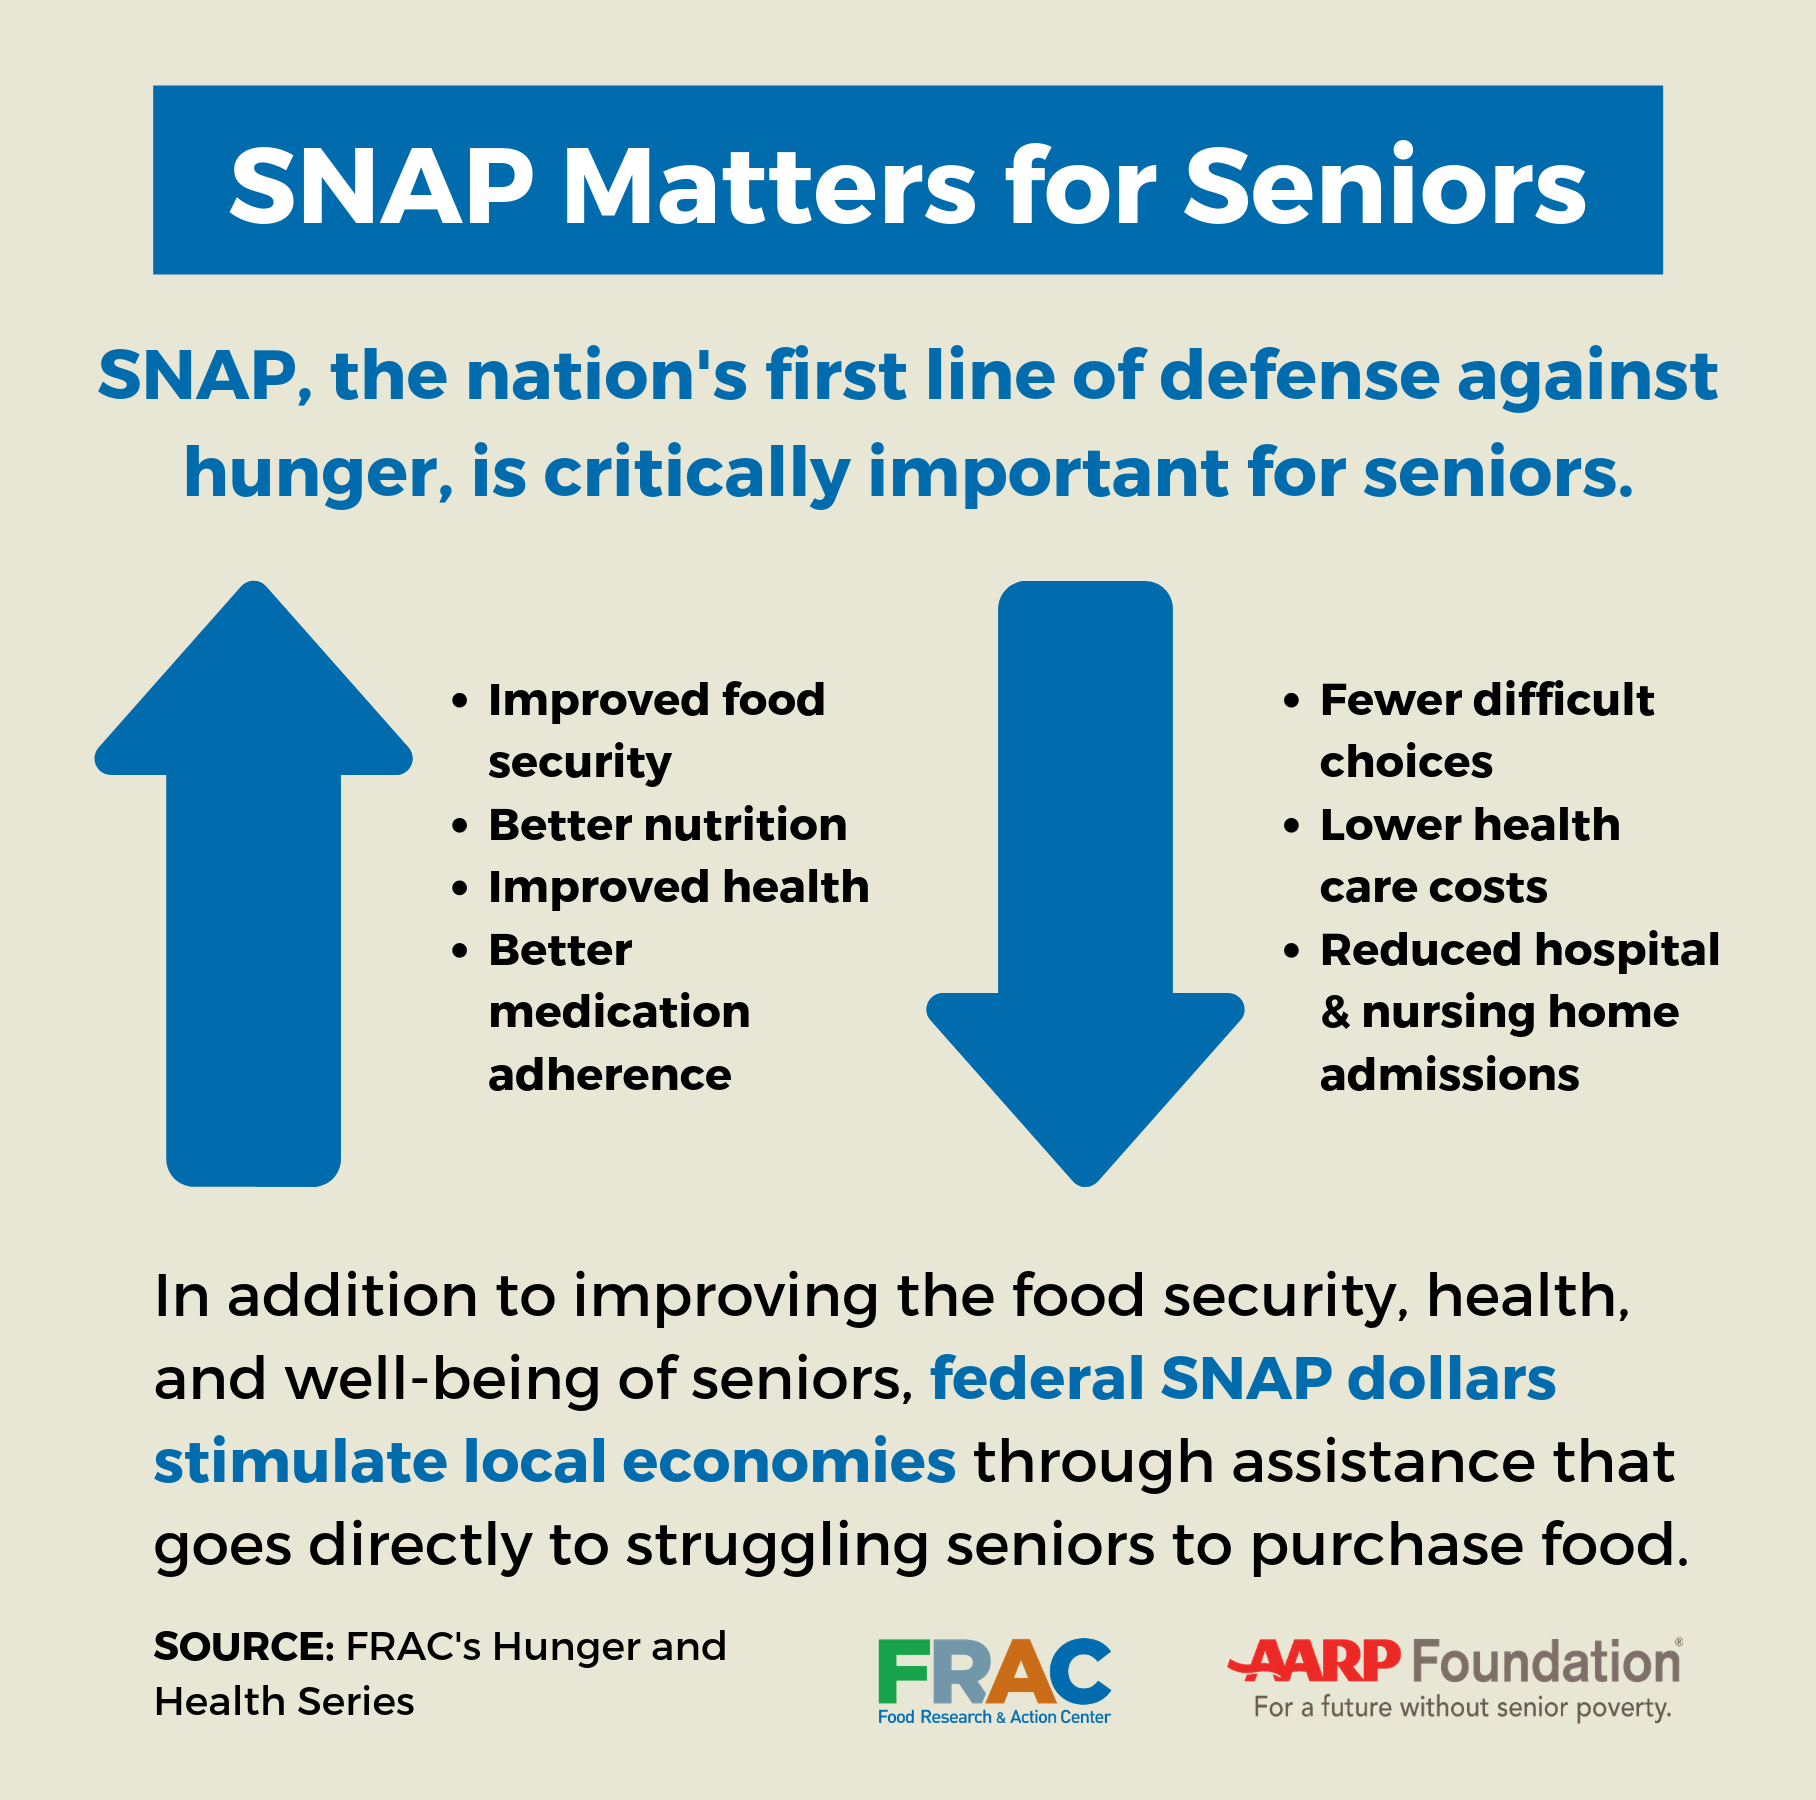 Communications Toolkit: SNAP Matters for Seniors - Food Research